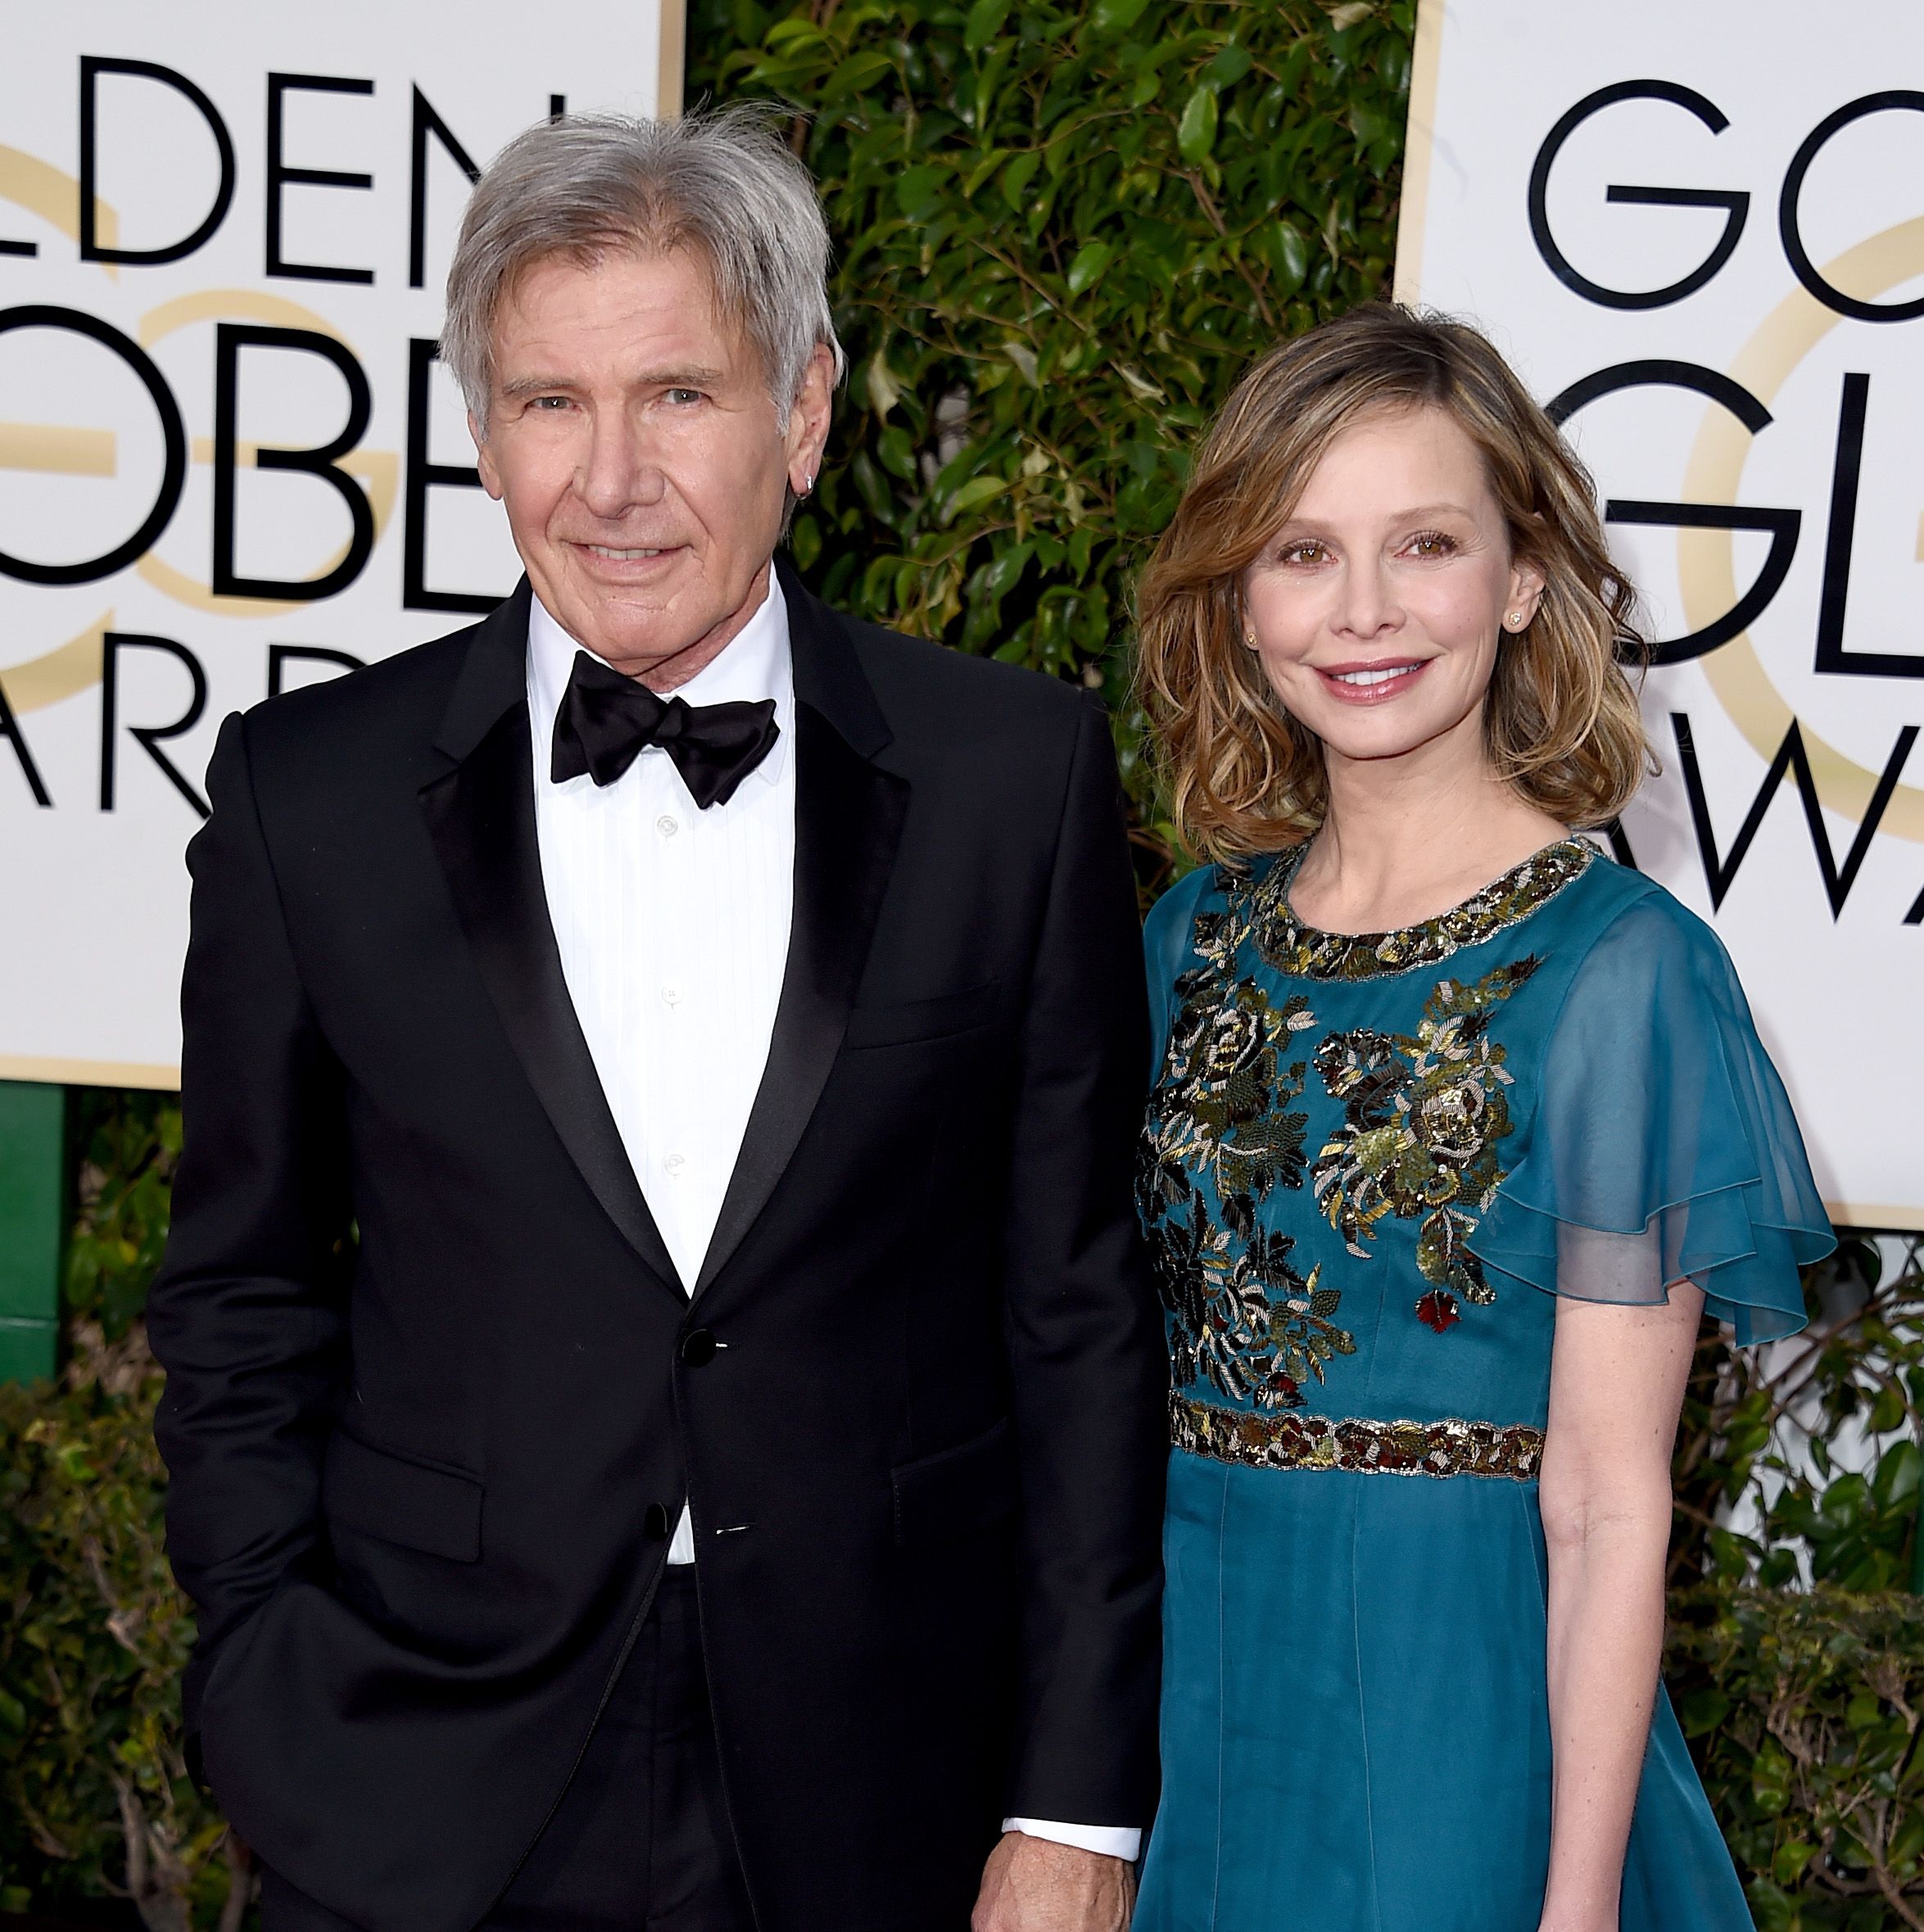 Harrison Ford's Wife Calista Flockhart Helped Him Through One of His Scariest Moments